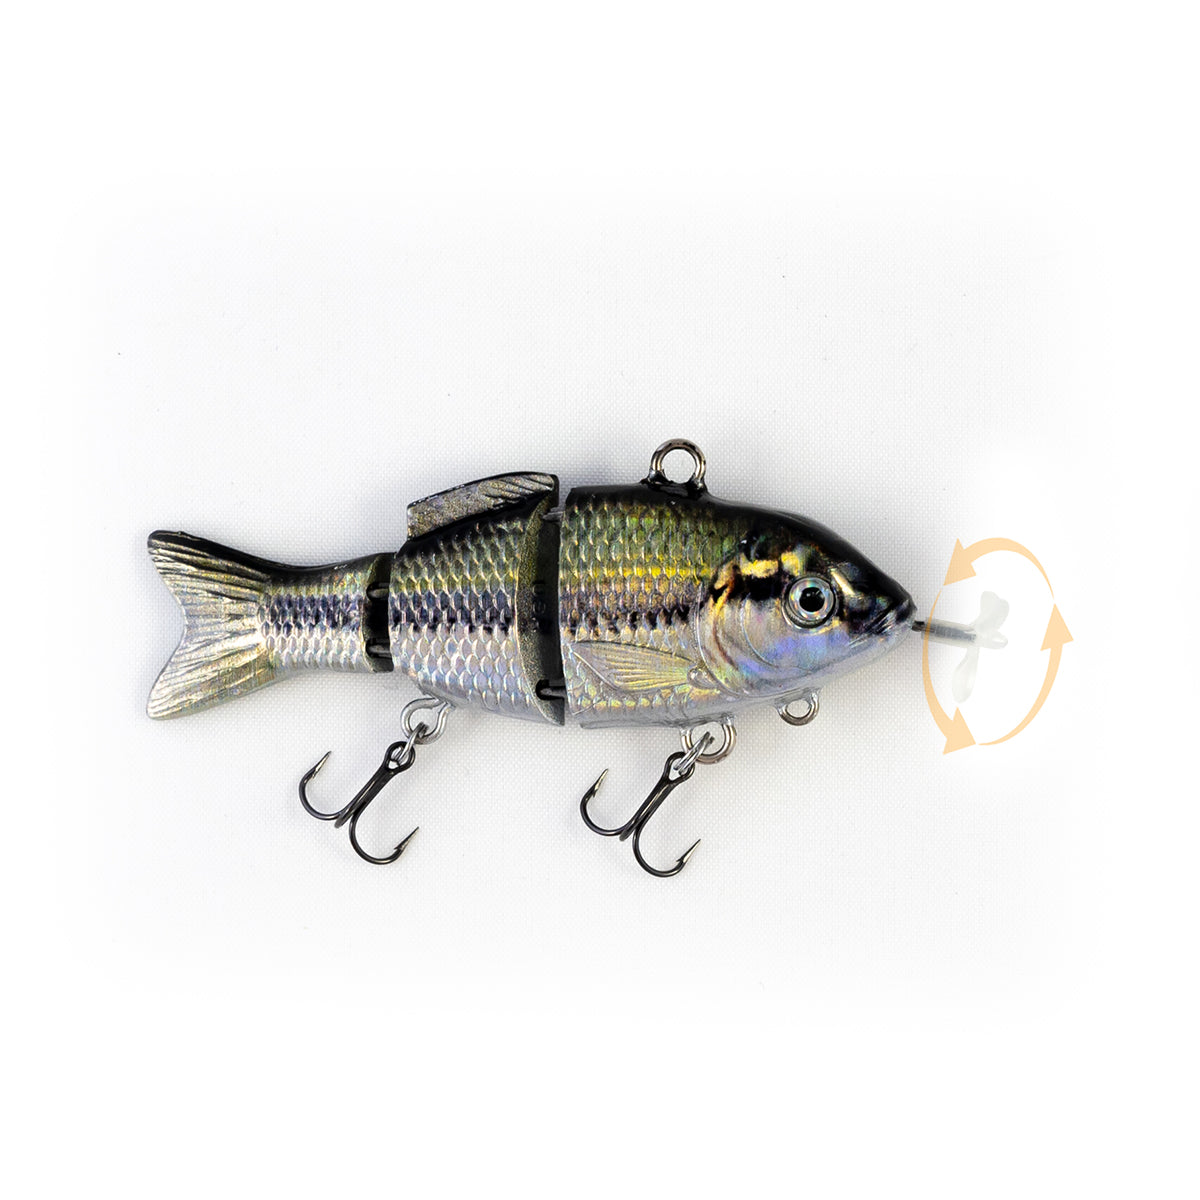 Robotic Live Fishing Lure 15cm/54g Jointed Bait Electric Swimbait